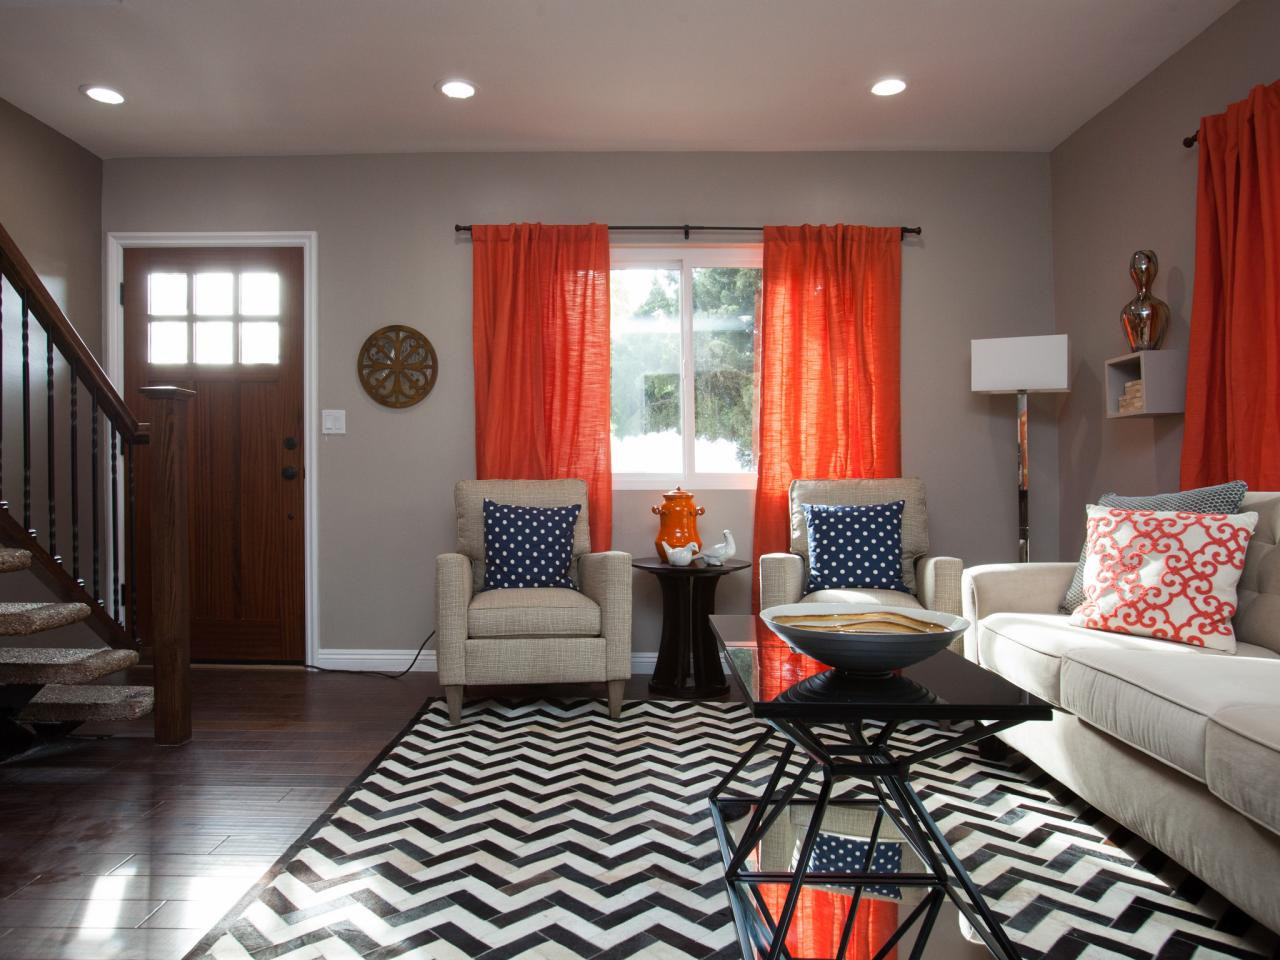 Orange Curtains For Living Room
 Curtains for Living Room and How to Find the Right e